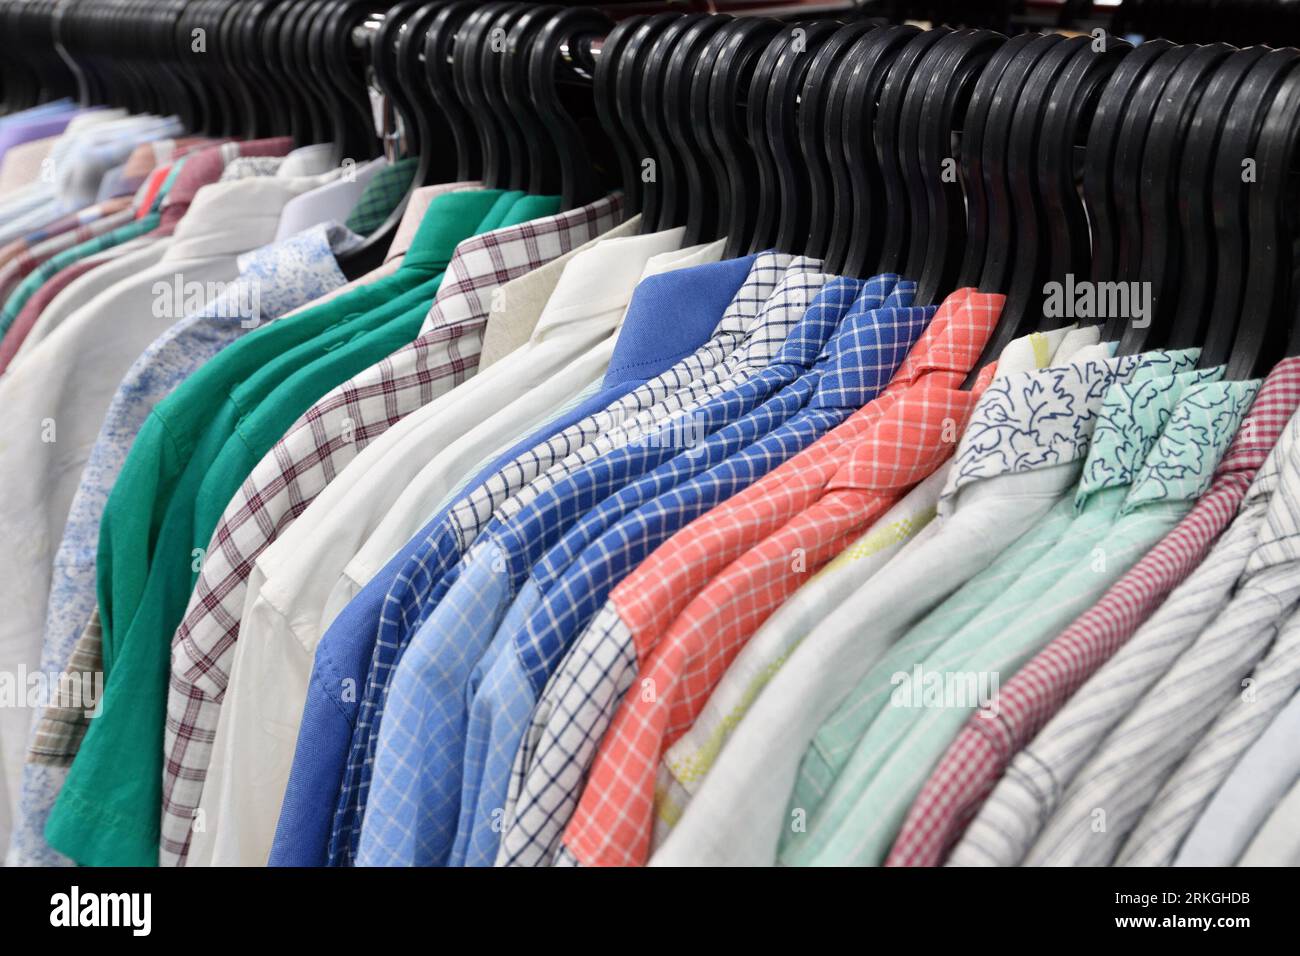 collection of shirts on hangers, men s fashion Stock Photo - Alamy